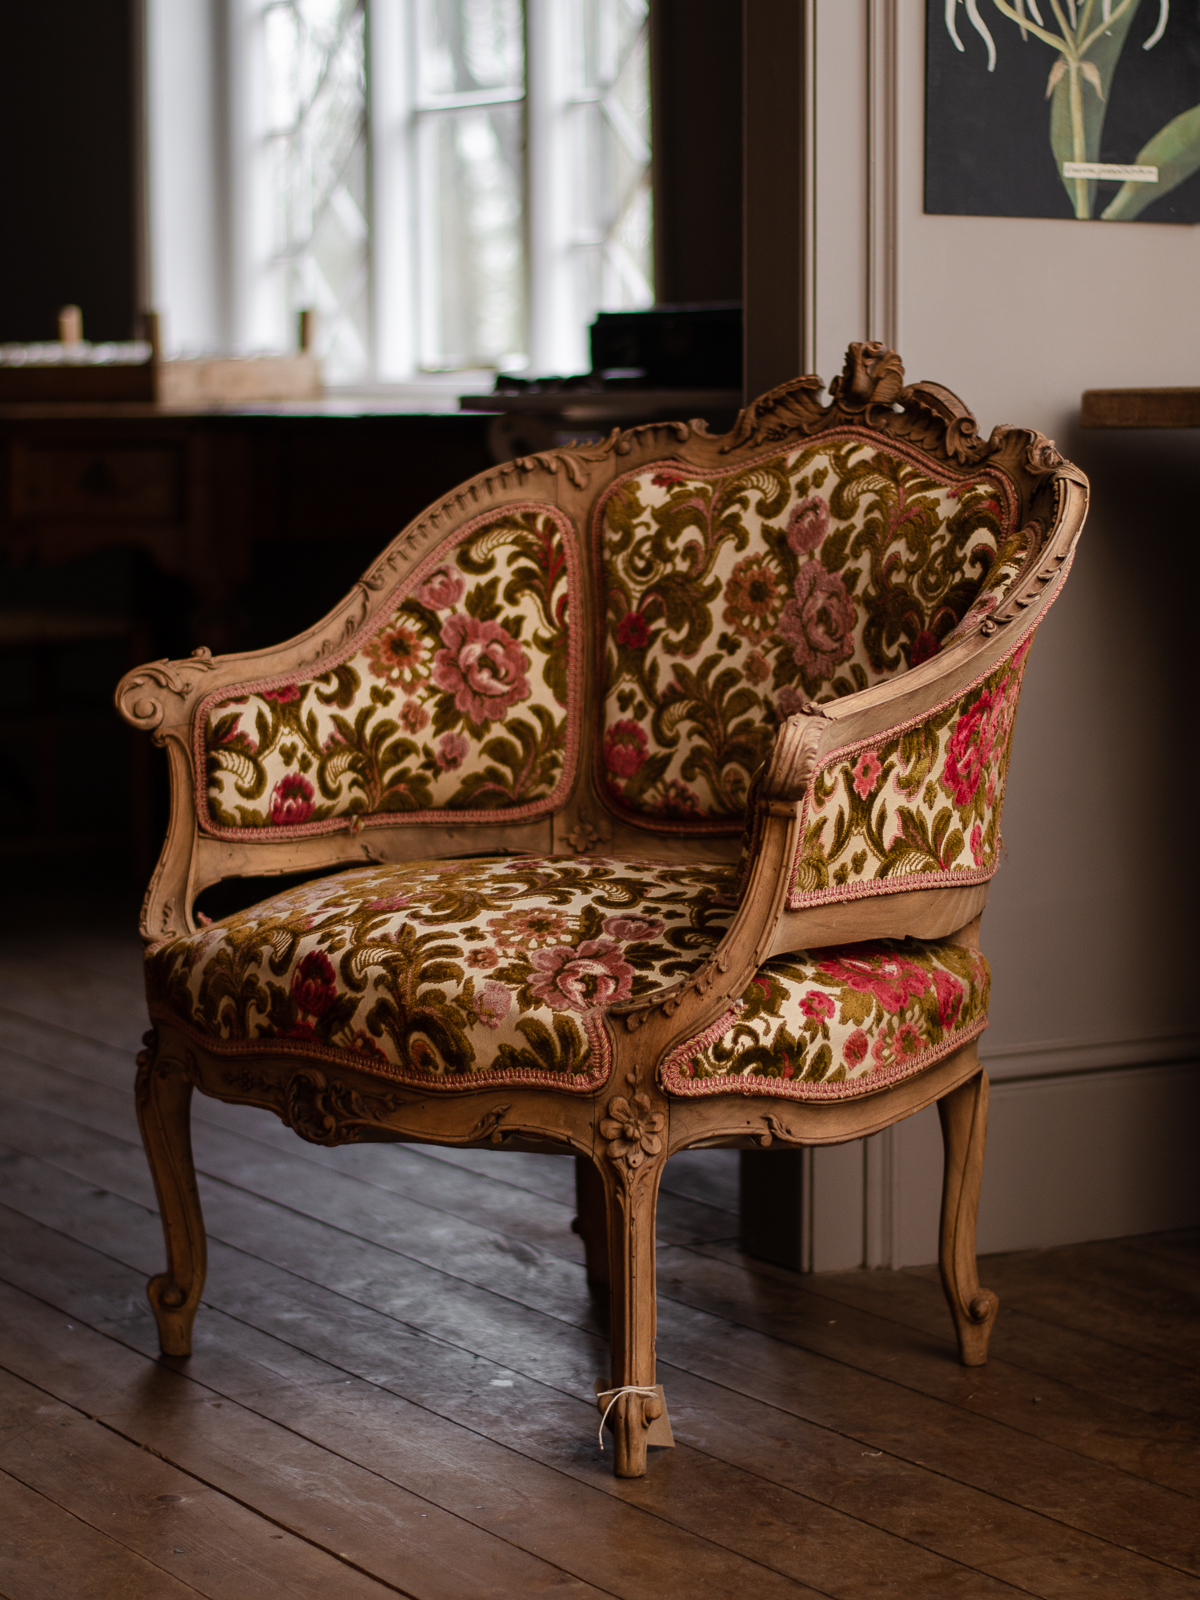 Flower Patterned Chair